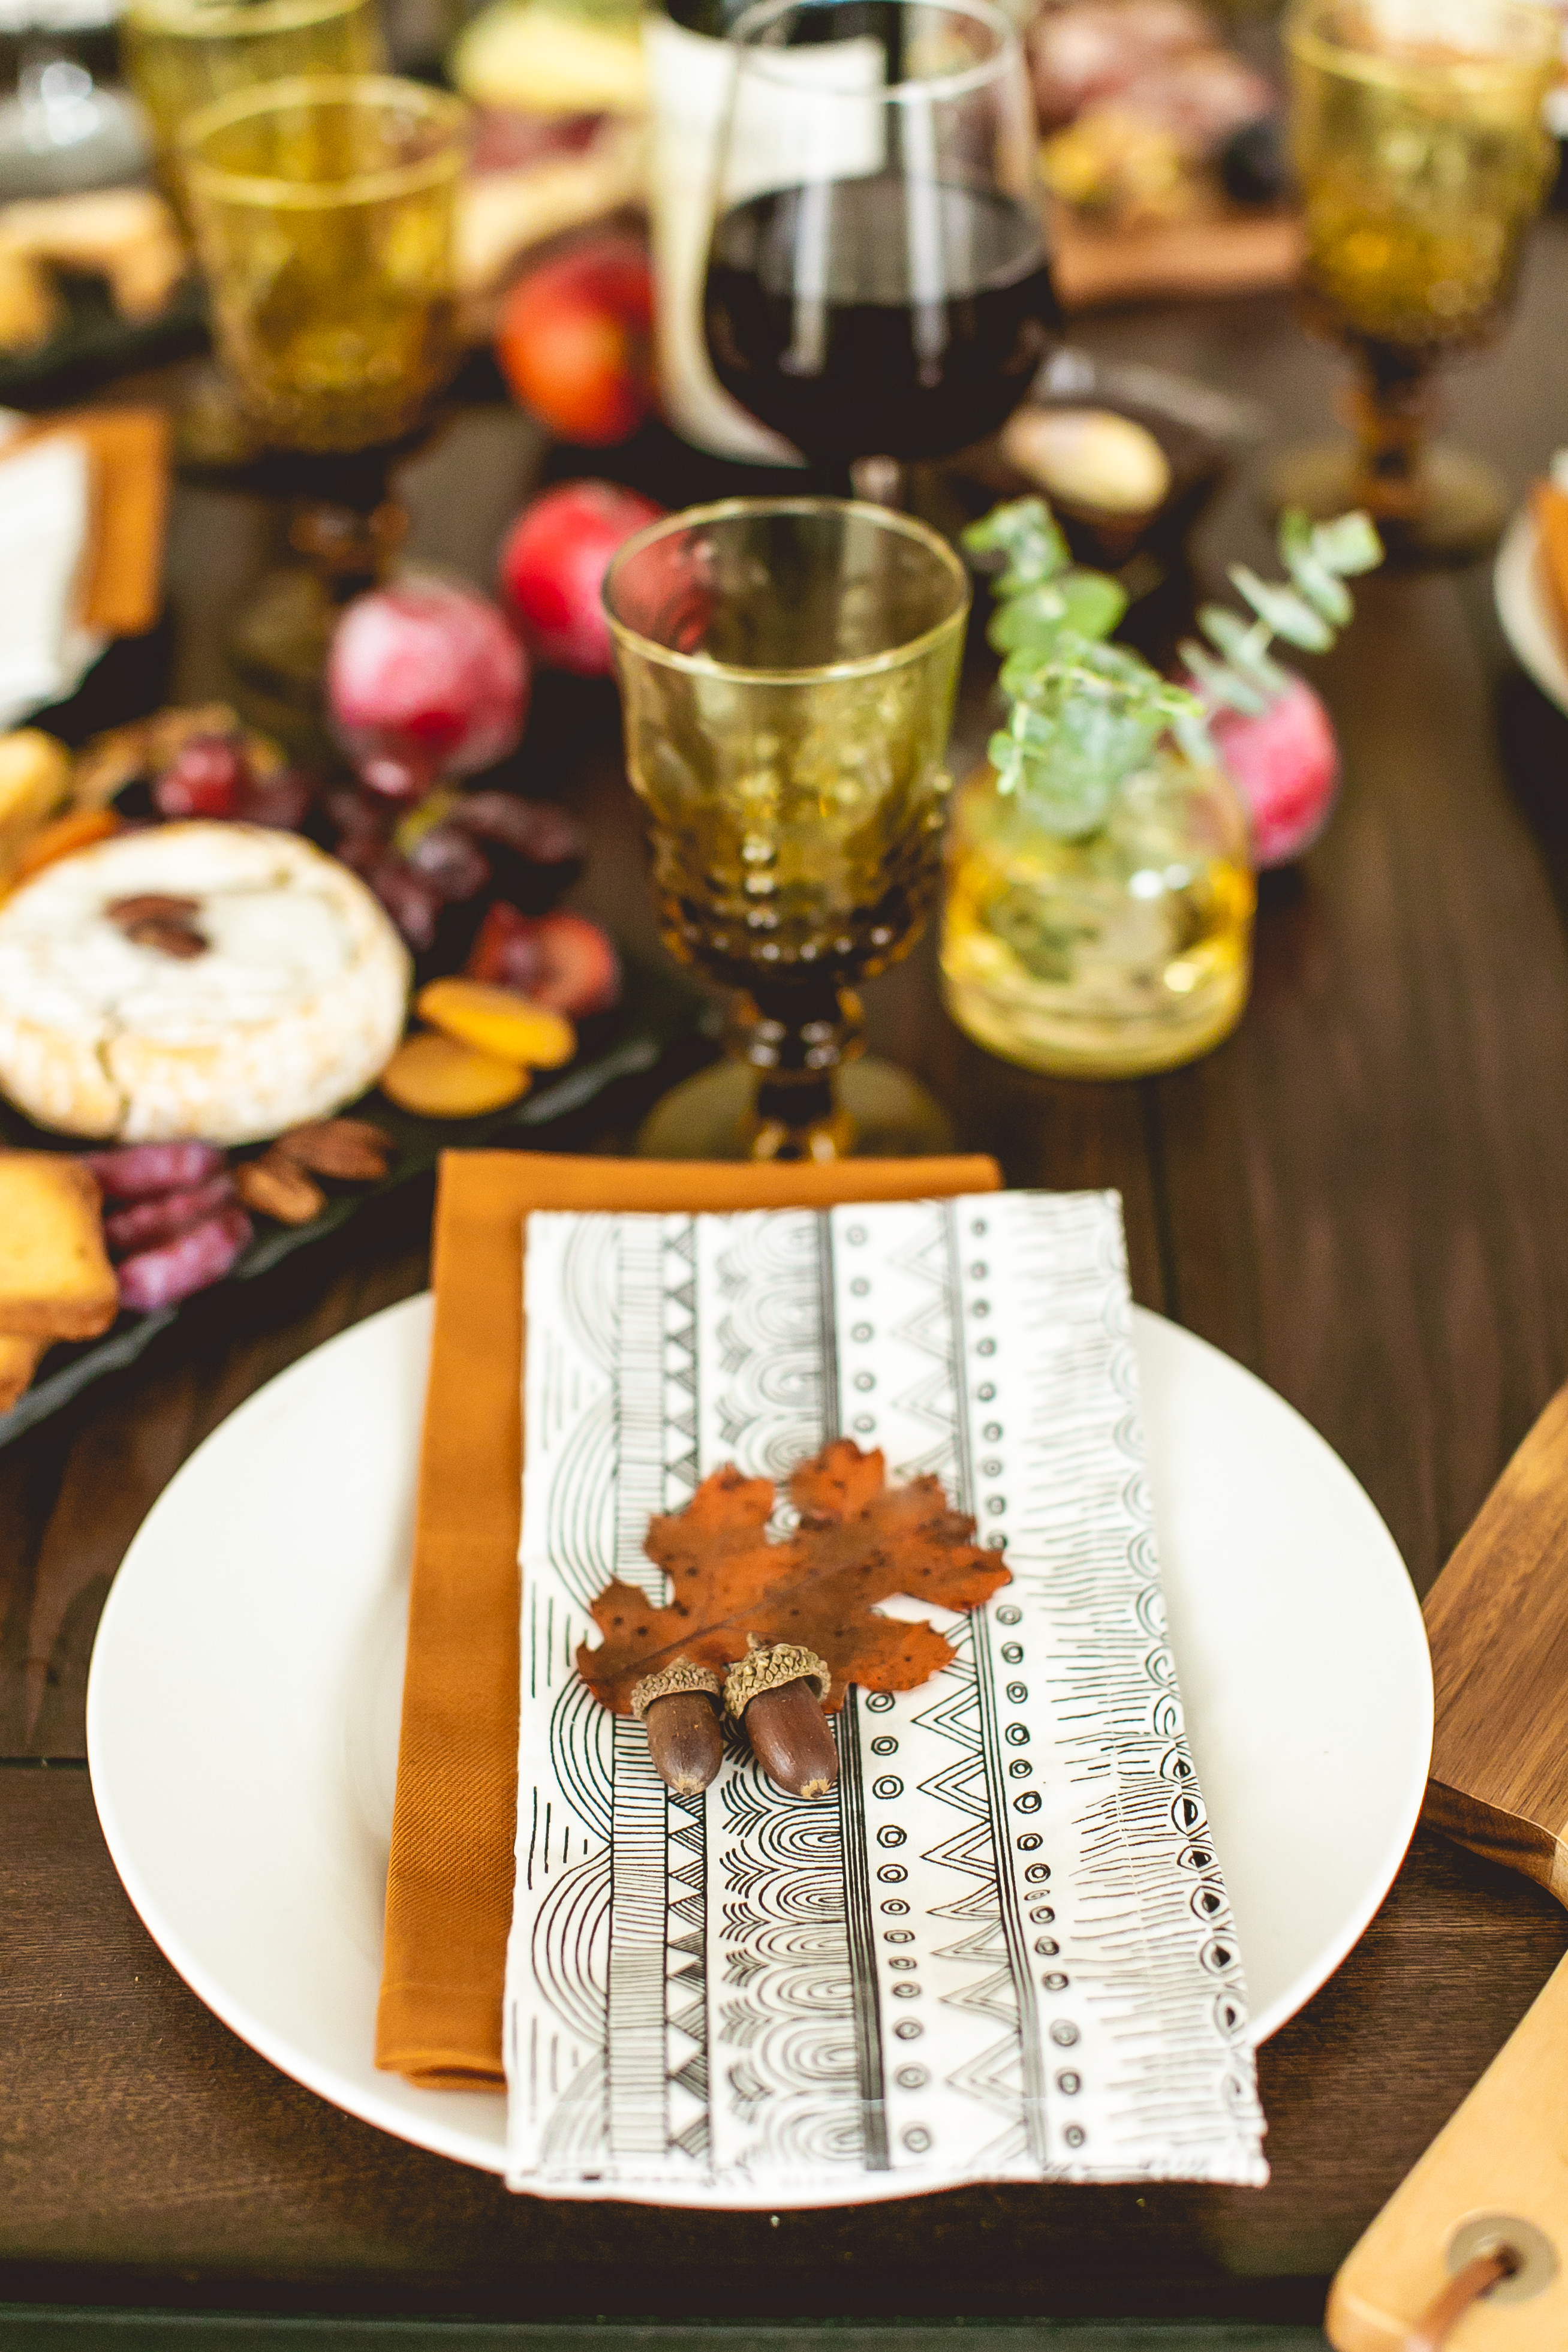 Table set for Thanksgiving with white and orange plates and napkins, with wineglasses, charcuterie board and apples in the background.